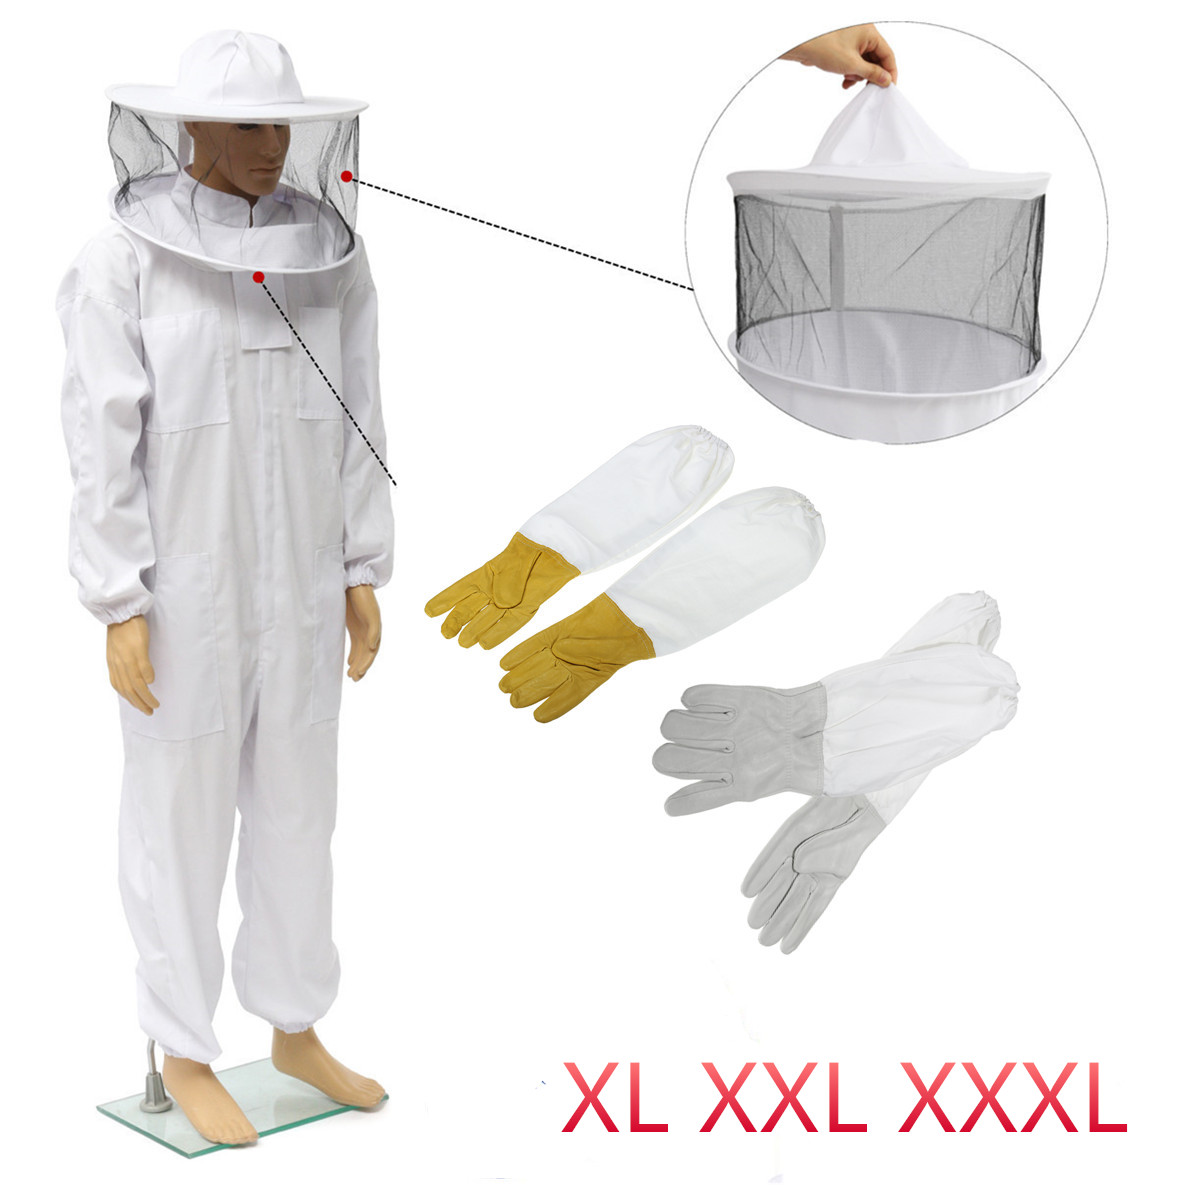 Beekeepers-Bee-Keeping-Cotton-Full-Protector-Suit-With-Veil-Hat-Hood-Bee-Suit-XL-XXL-XXL-1277290-2